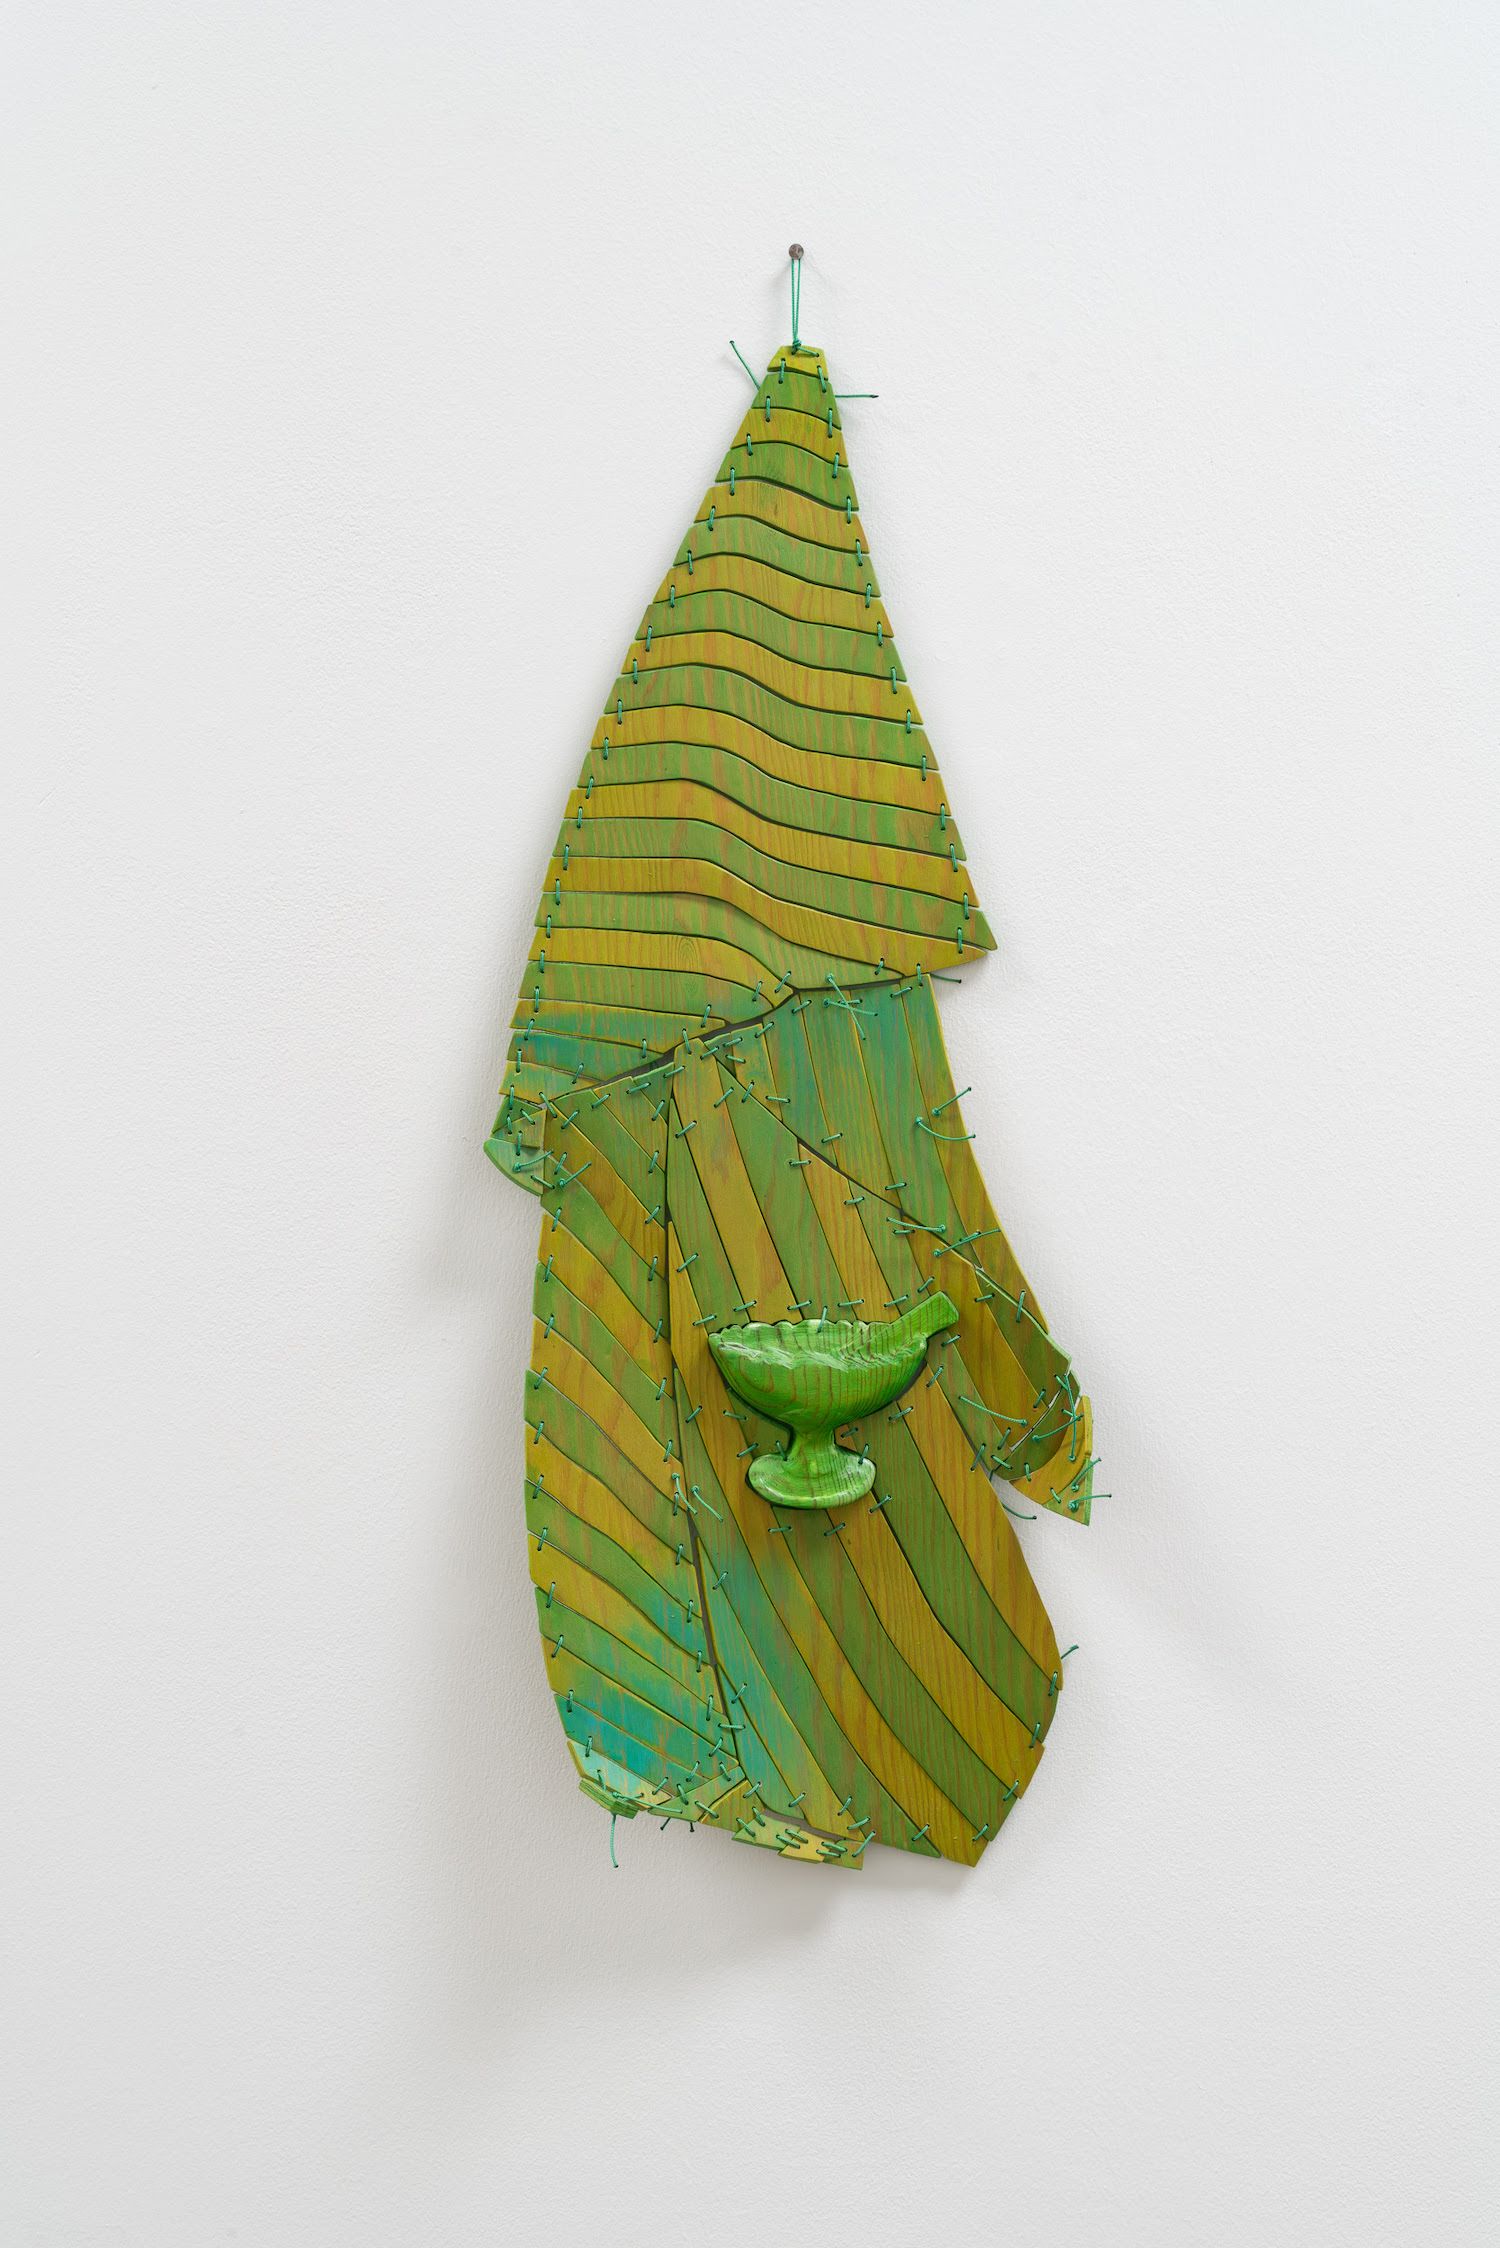 A wooden yellow and green sculpture on a white wall